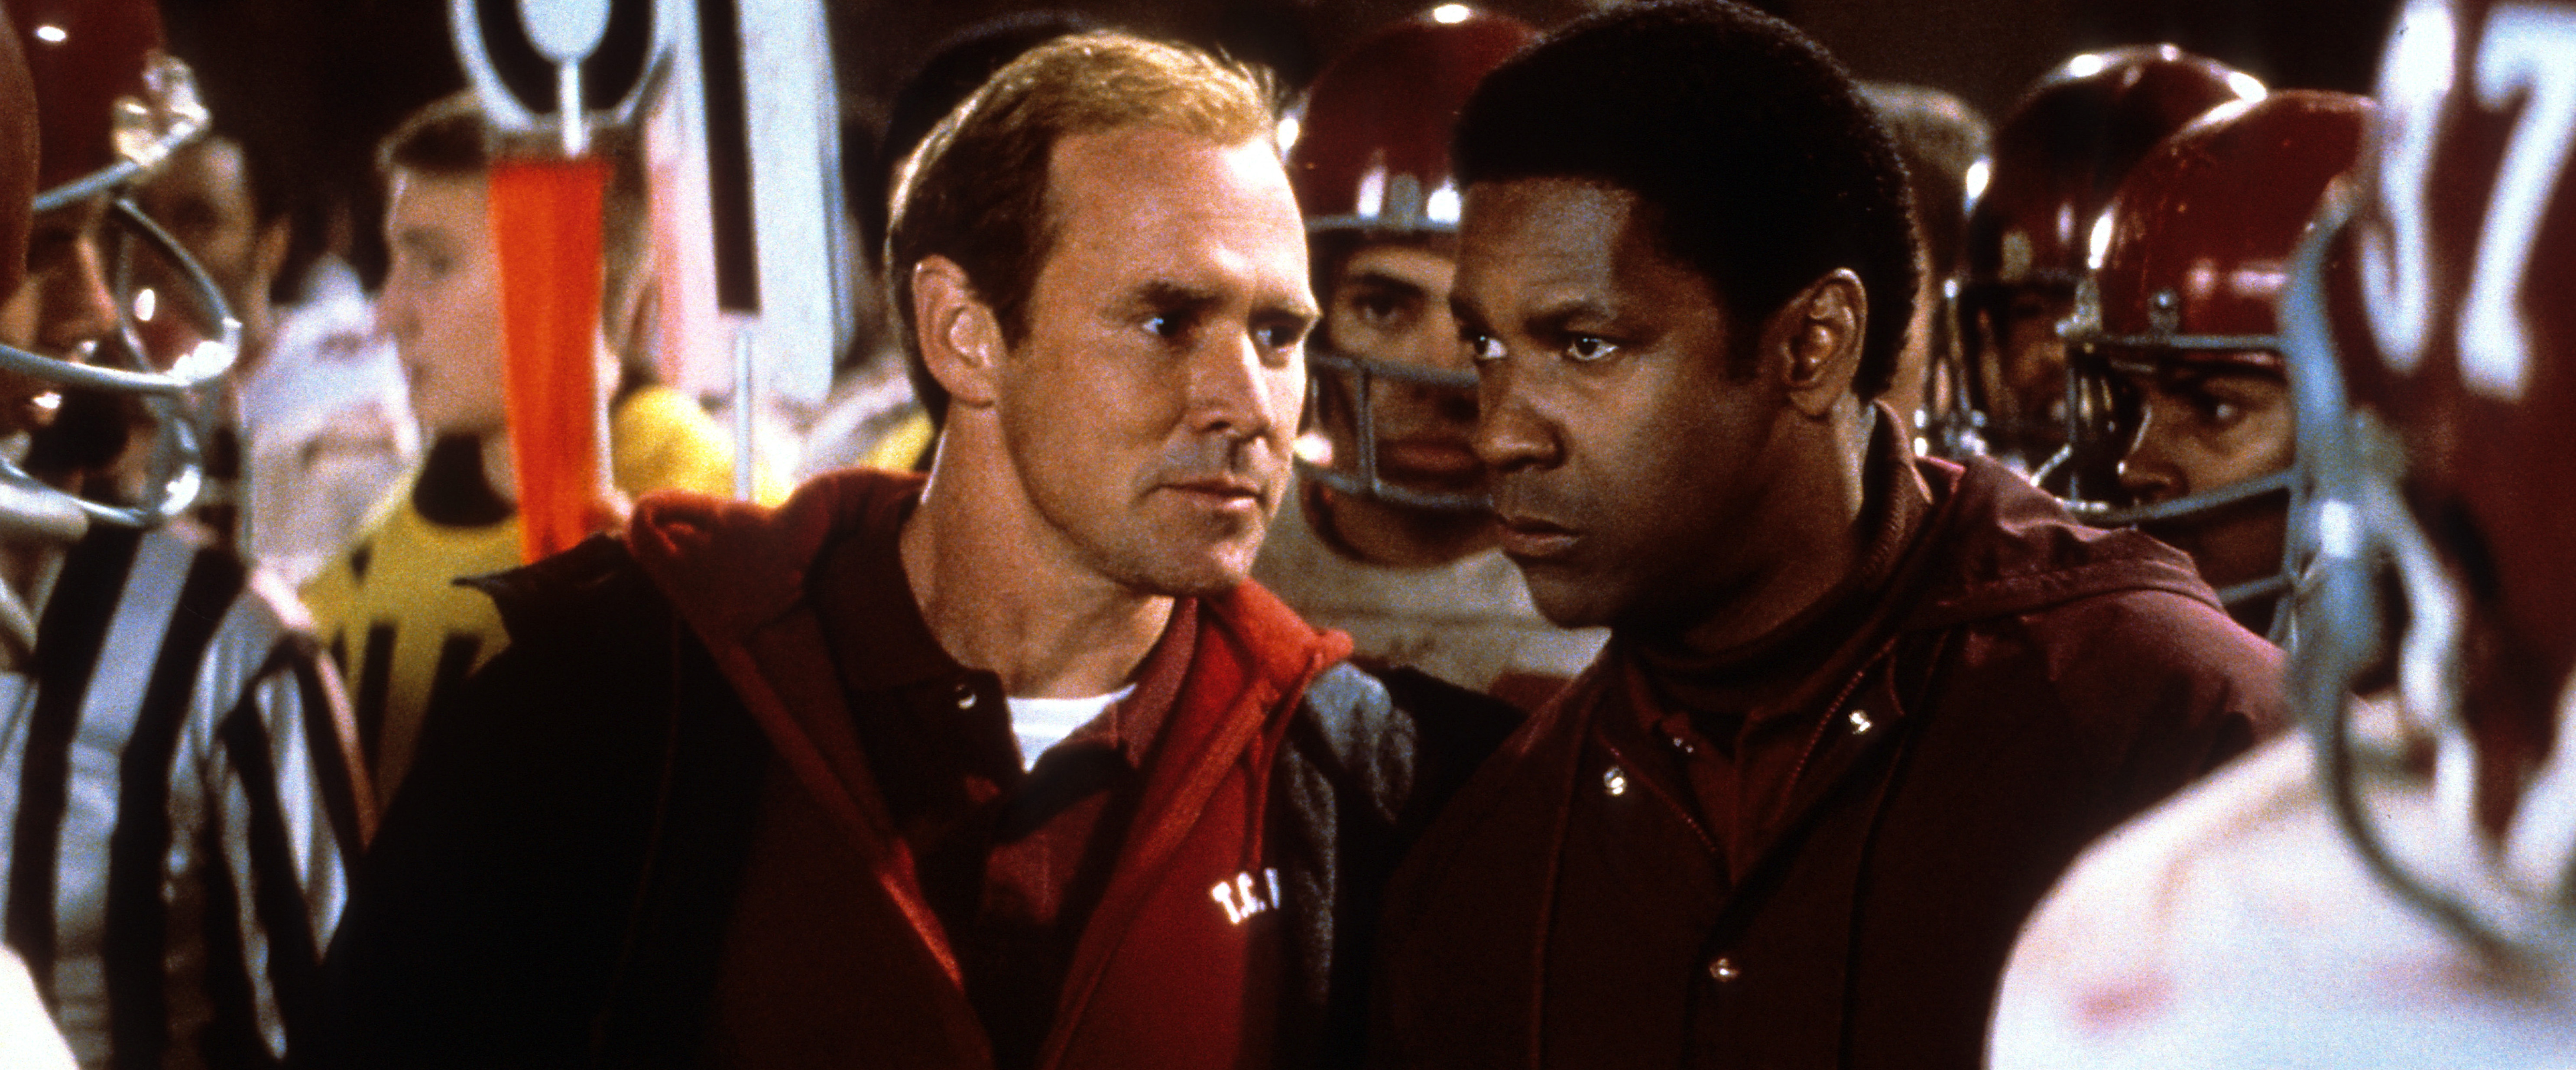 Still of Denzel Washington and Will Patton in Remember the Titans (2000)